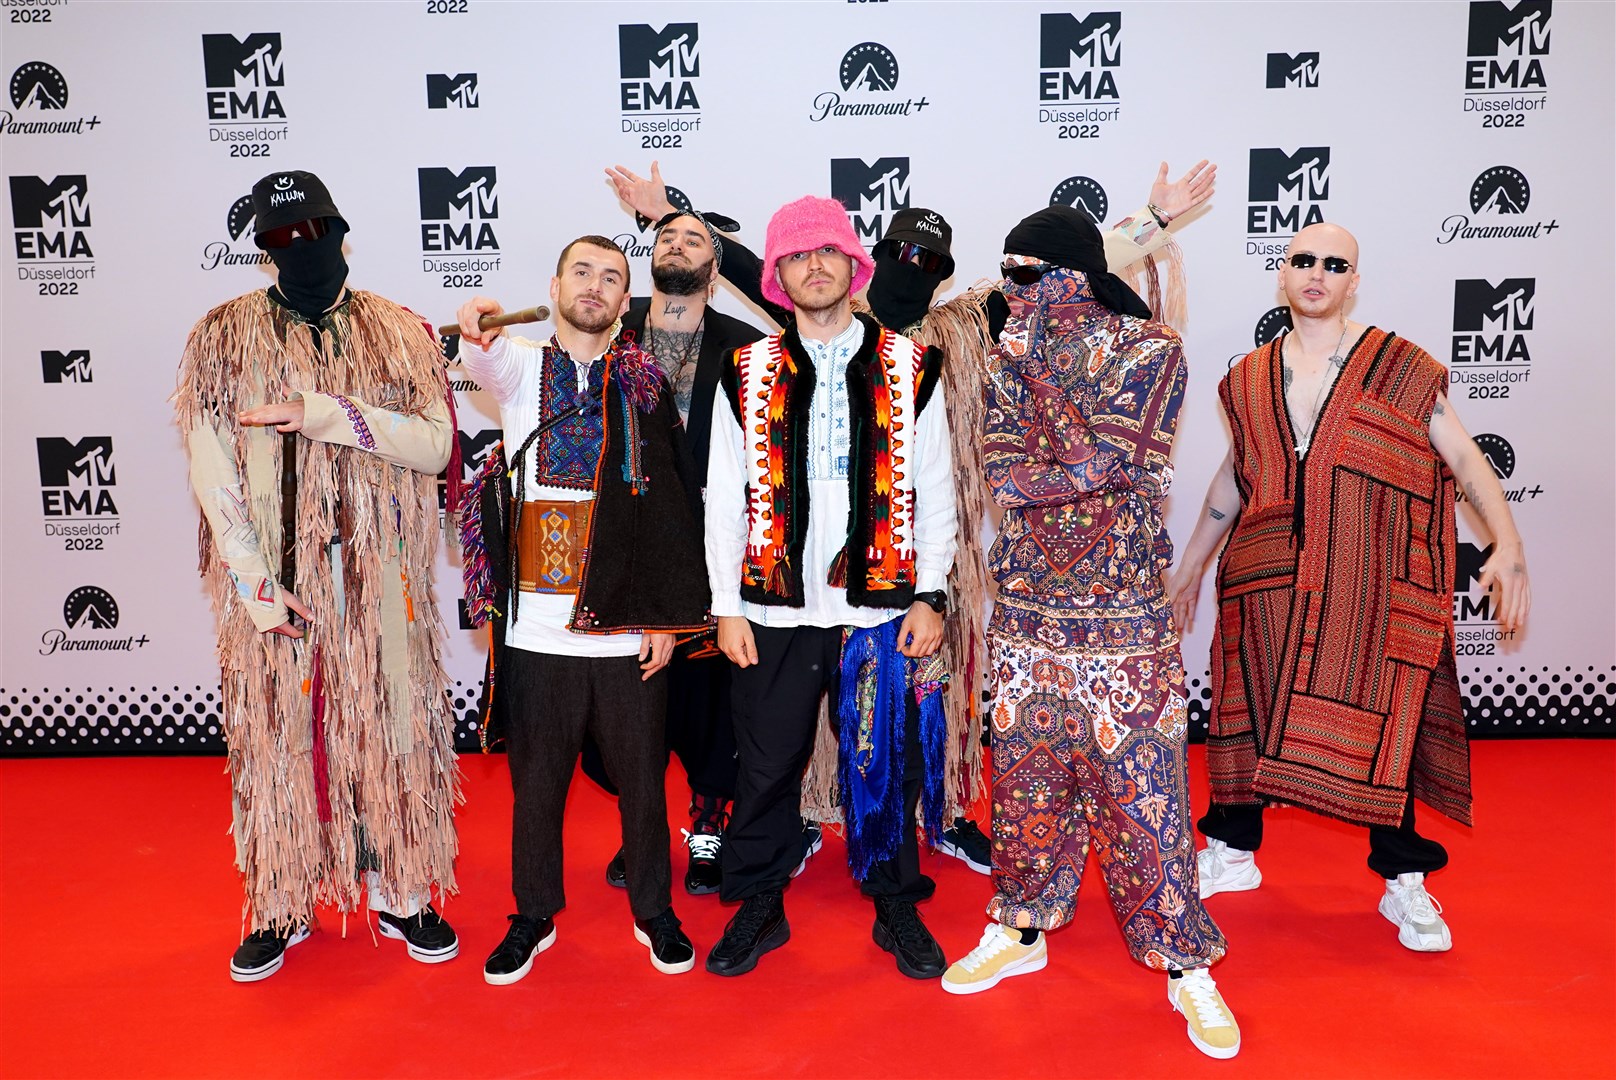 Kalush Orchestra on the red carpet (Ian West/PA)